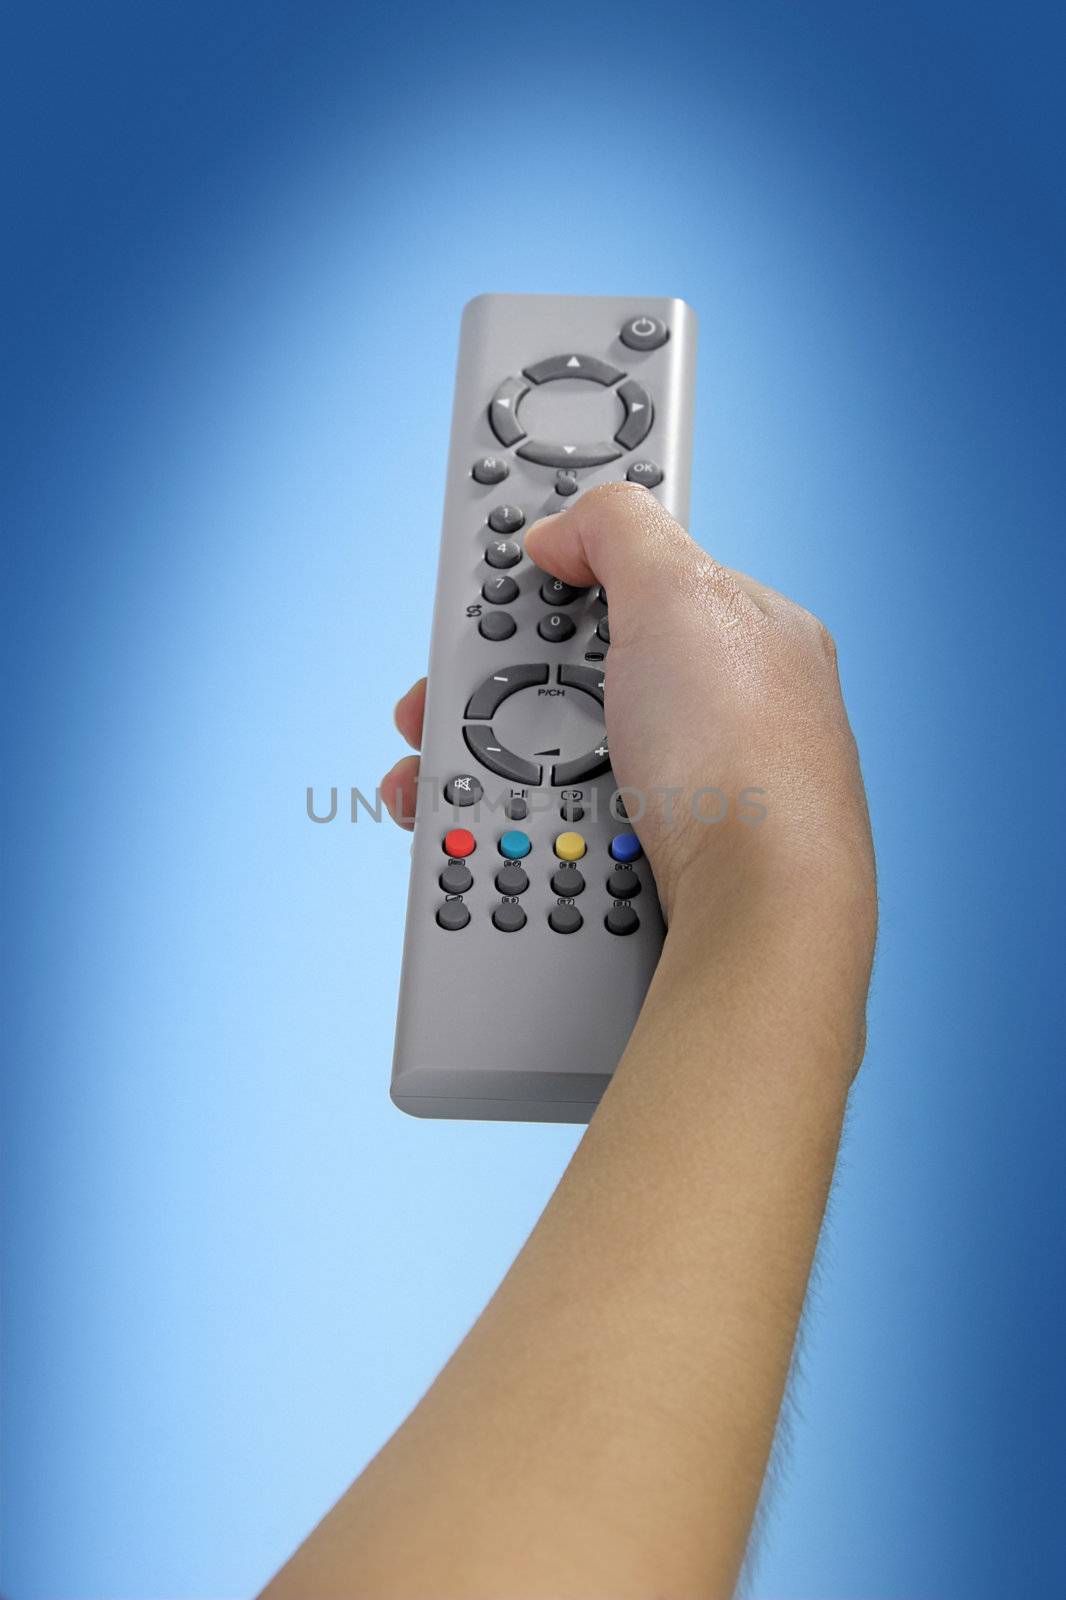 Human hand olding a tv remote control